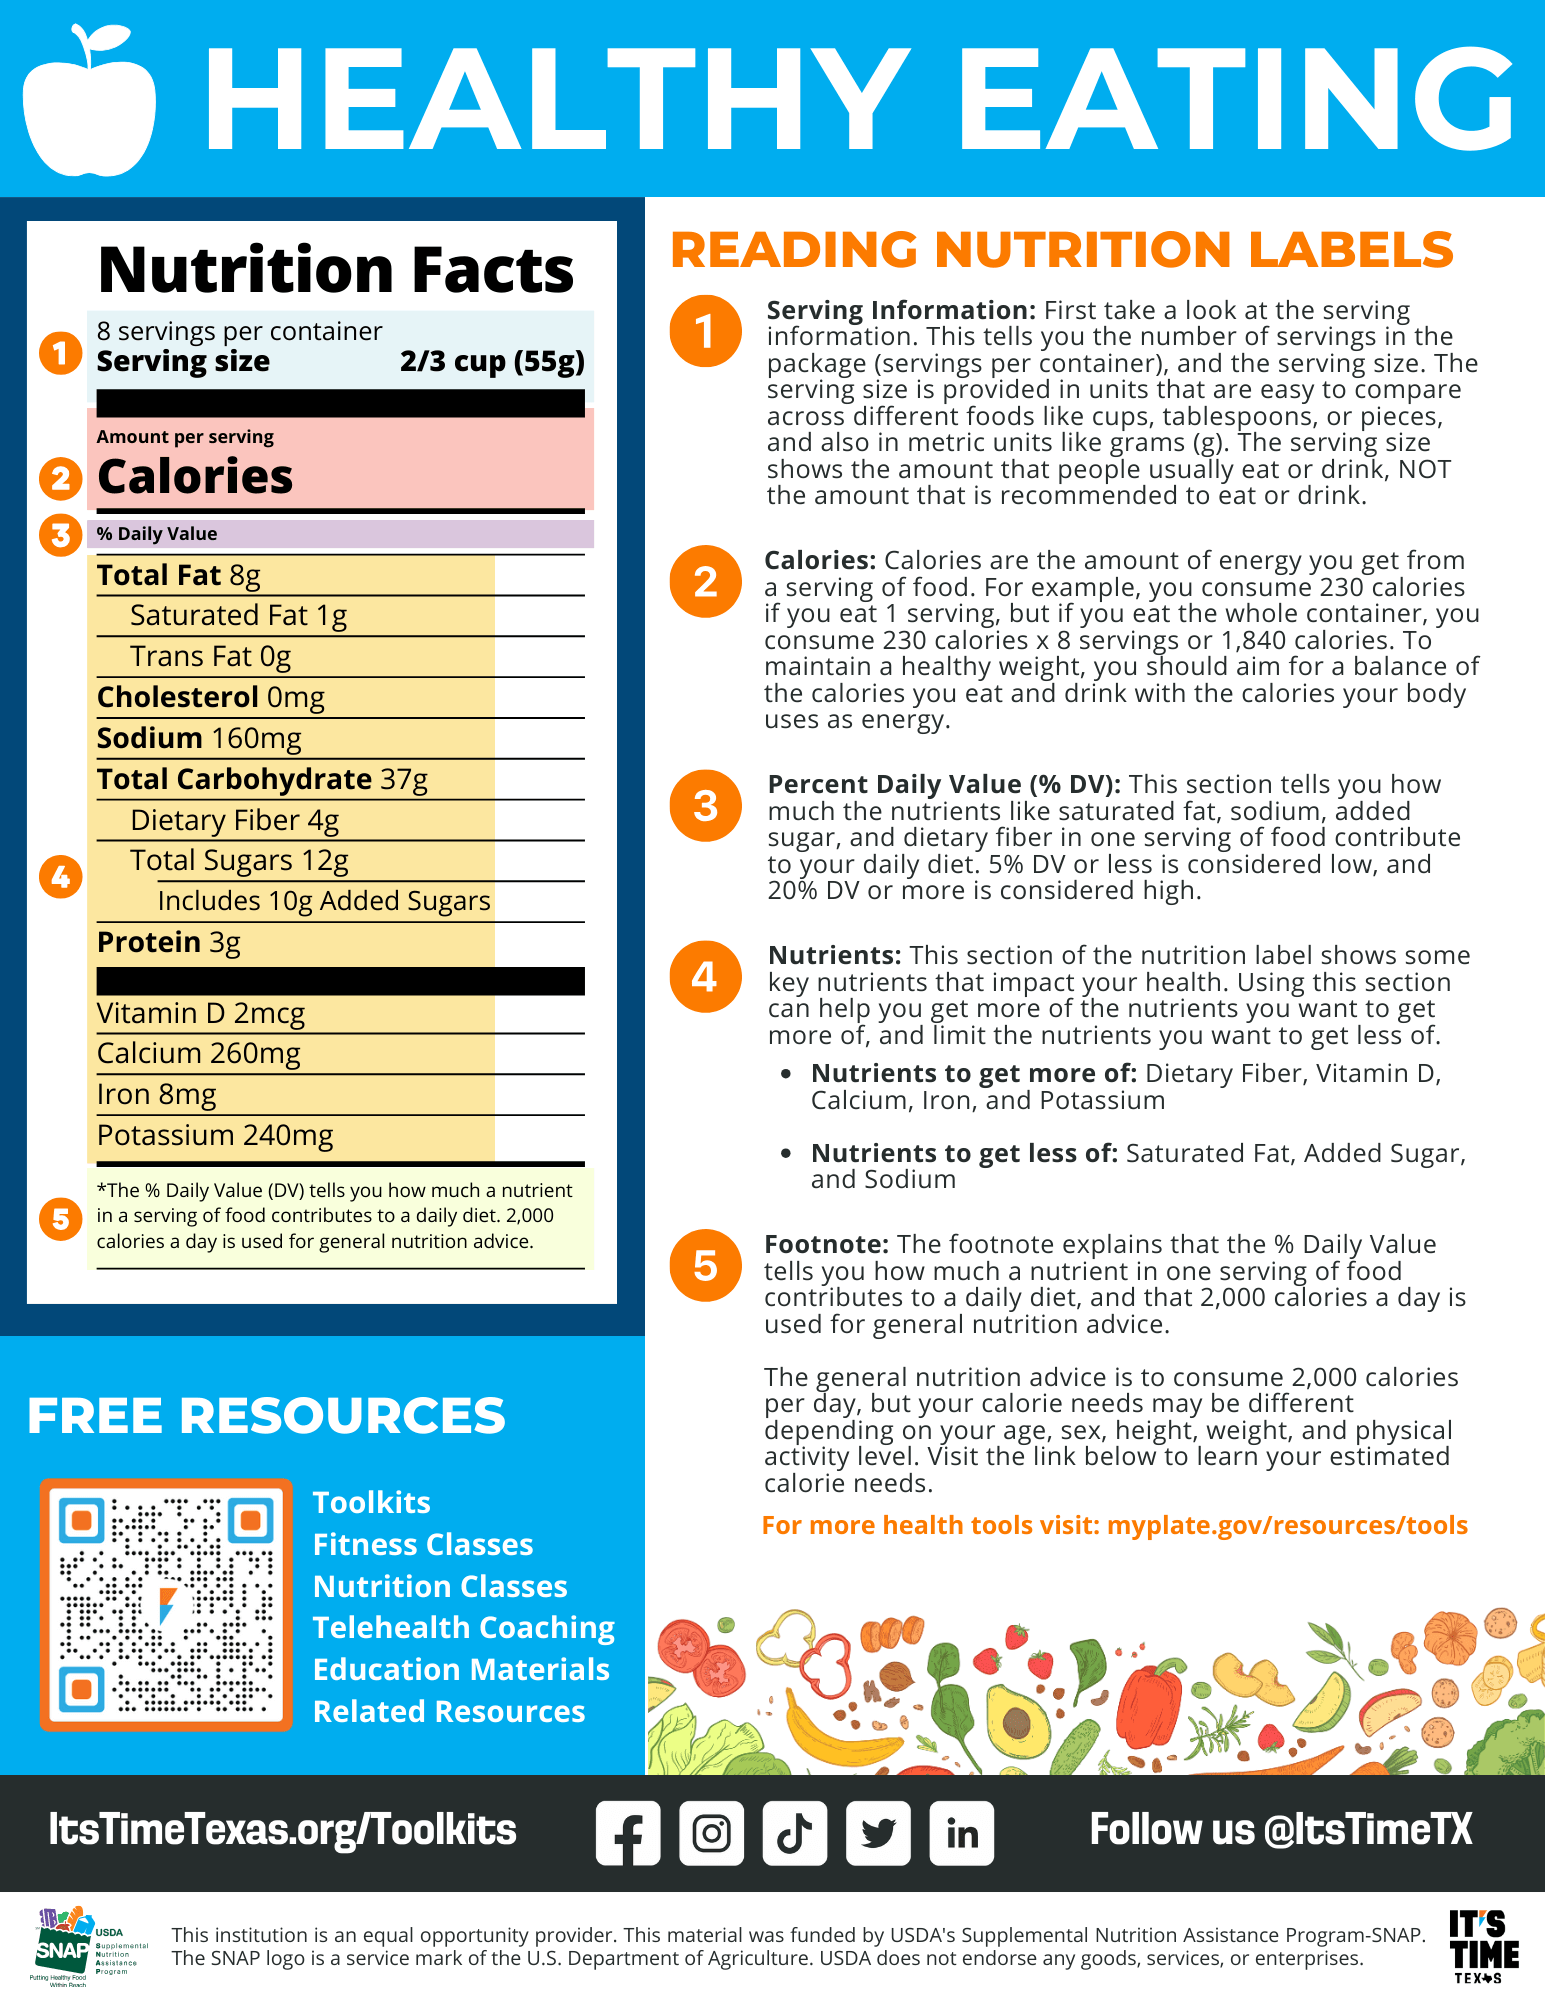 Reading Nutrition Labels